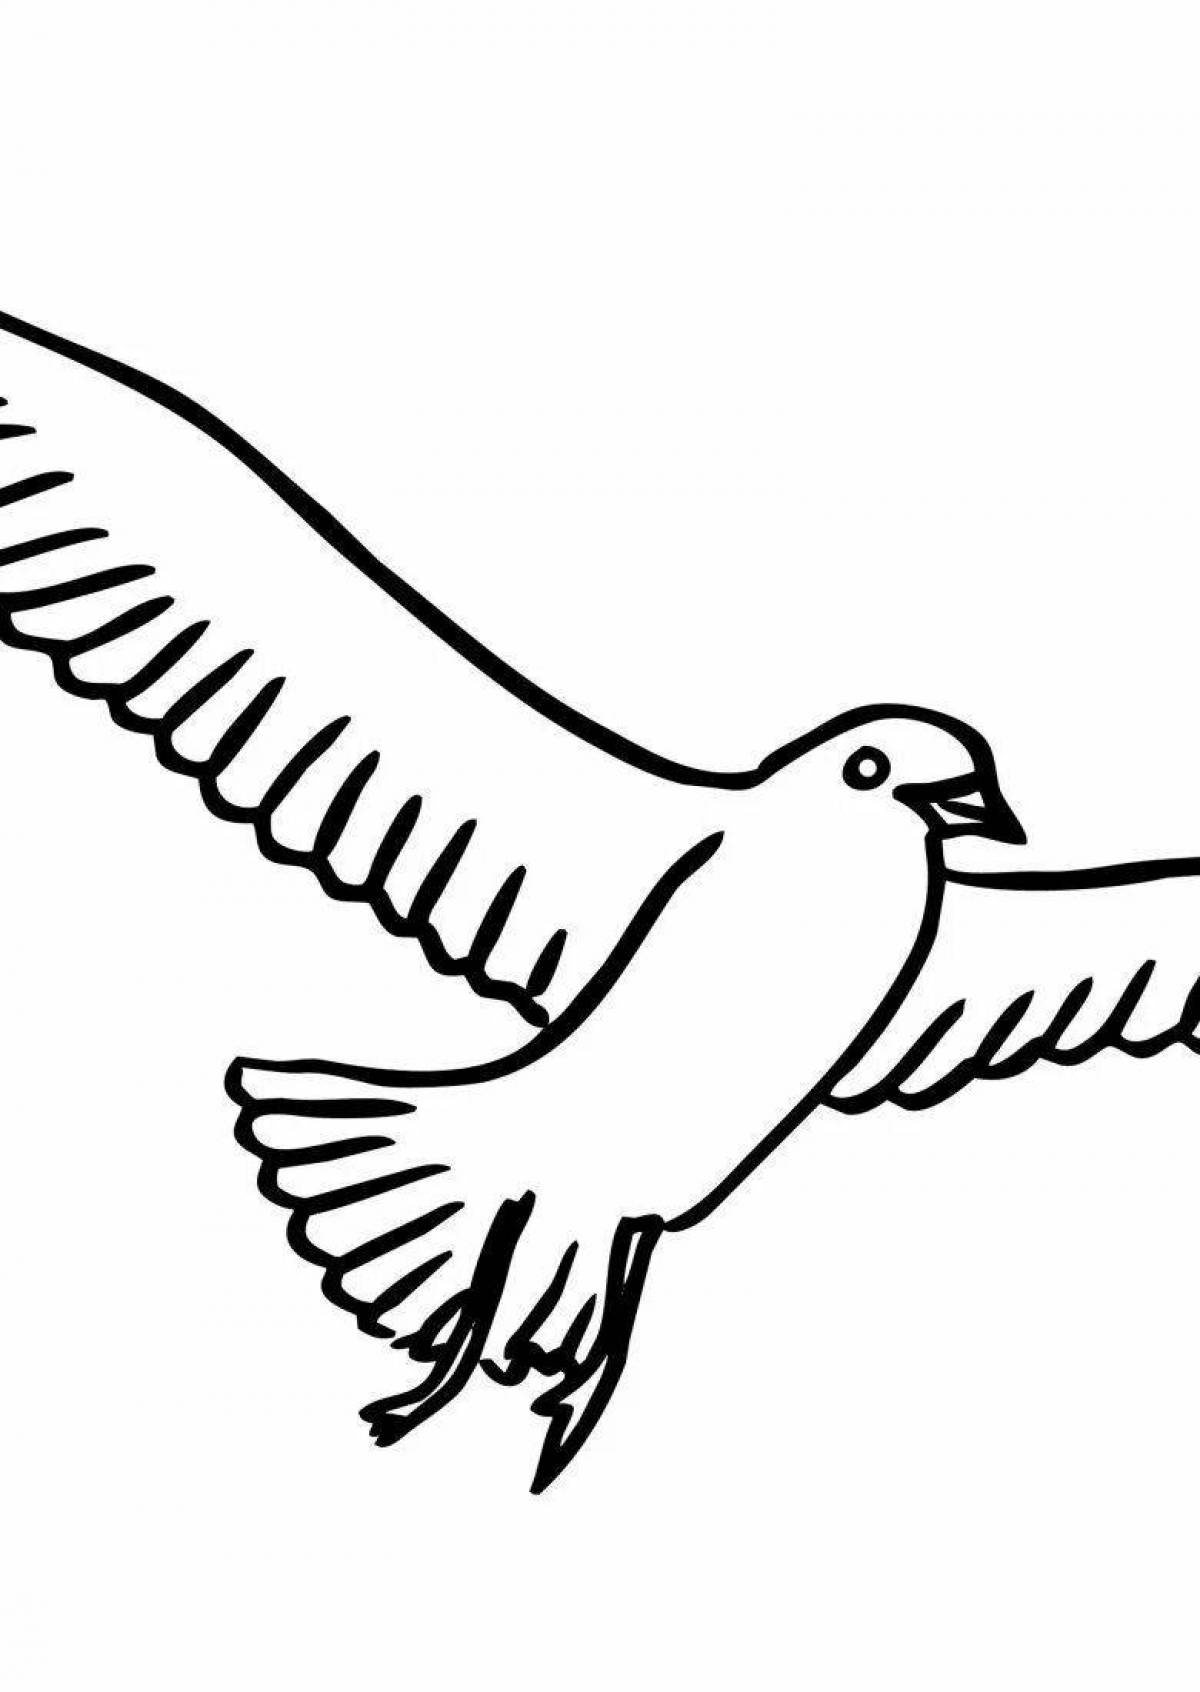 Coloring page energetic flying bird